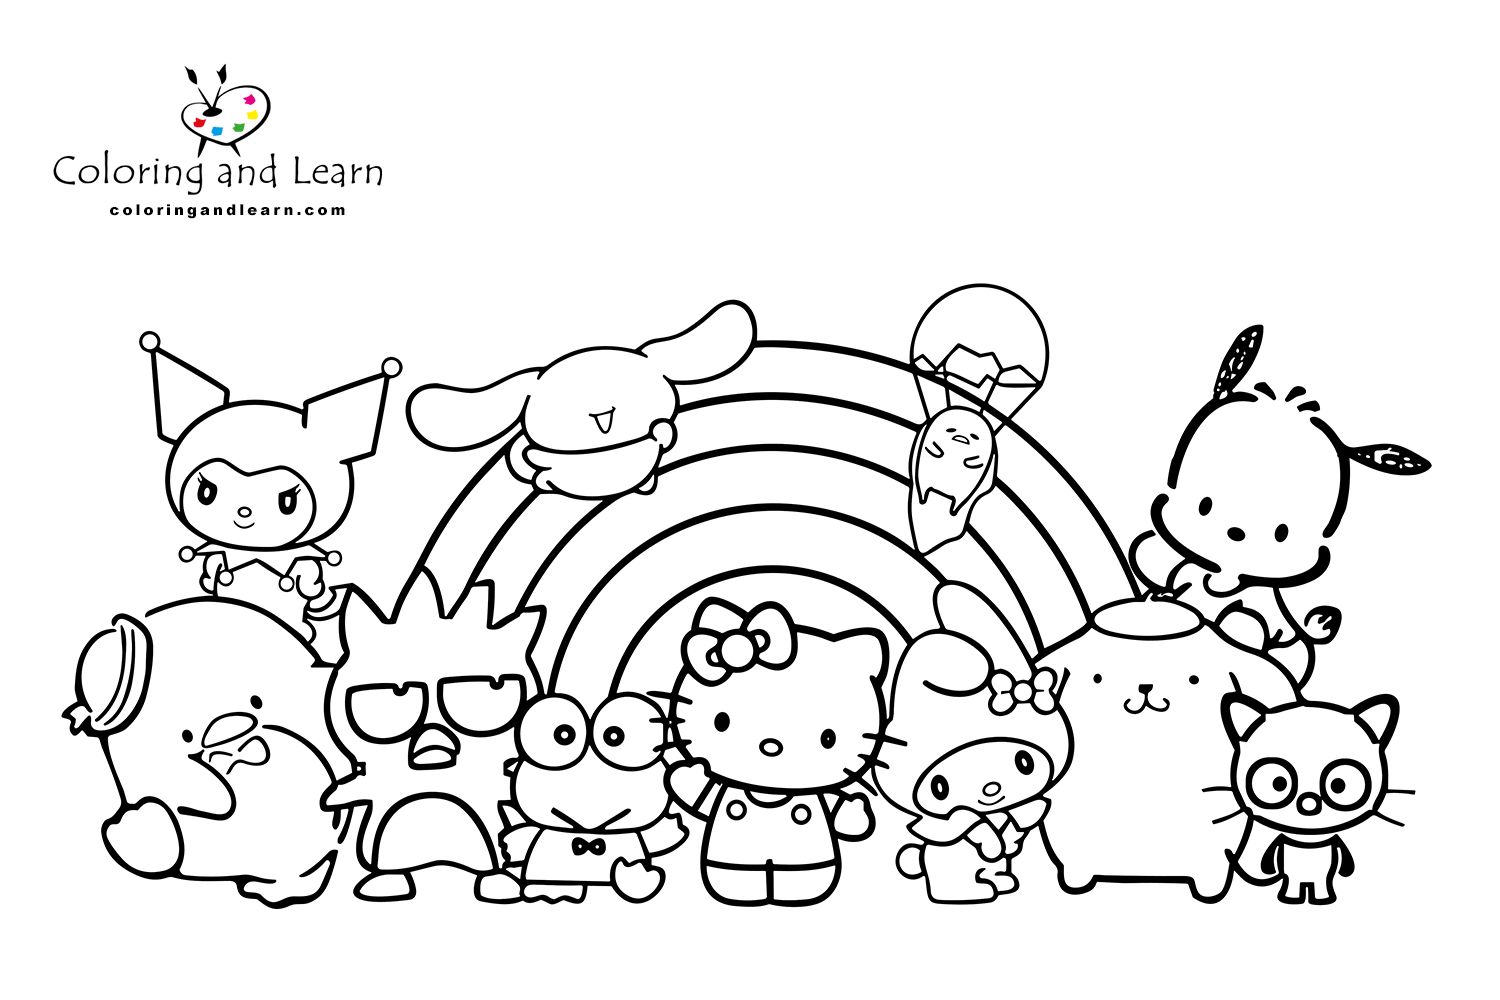 hello kitty best friends coloring pages